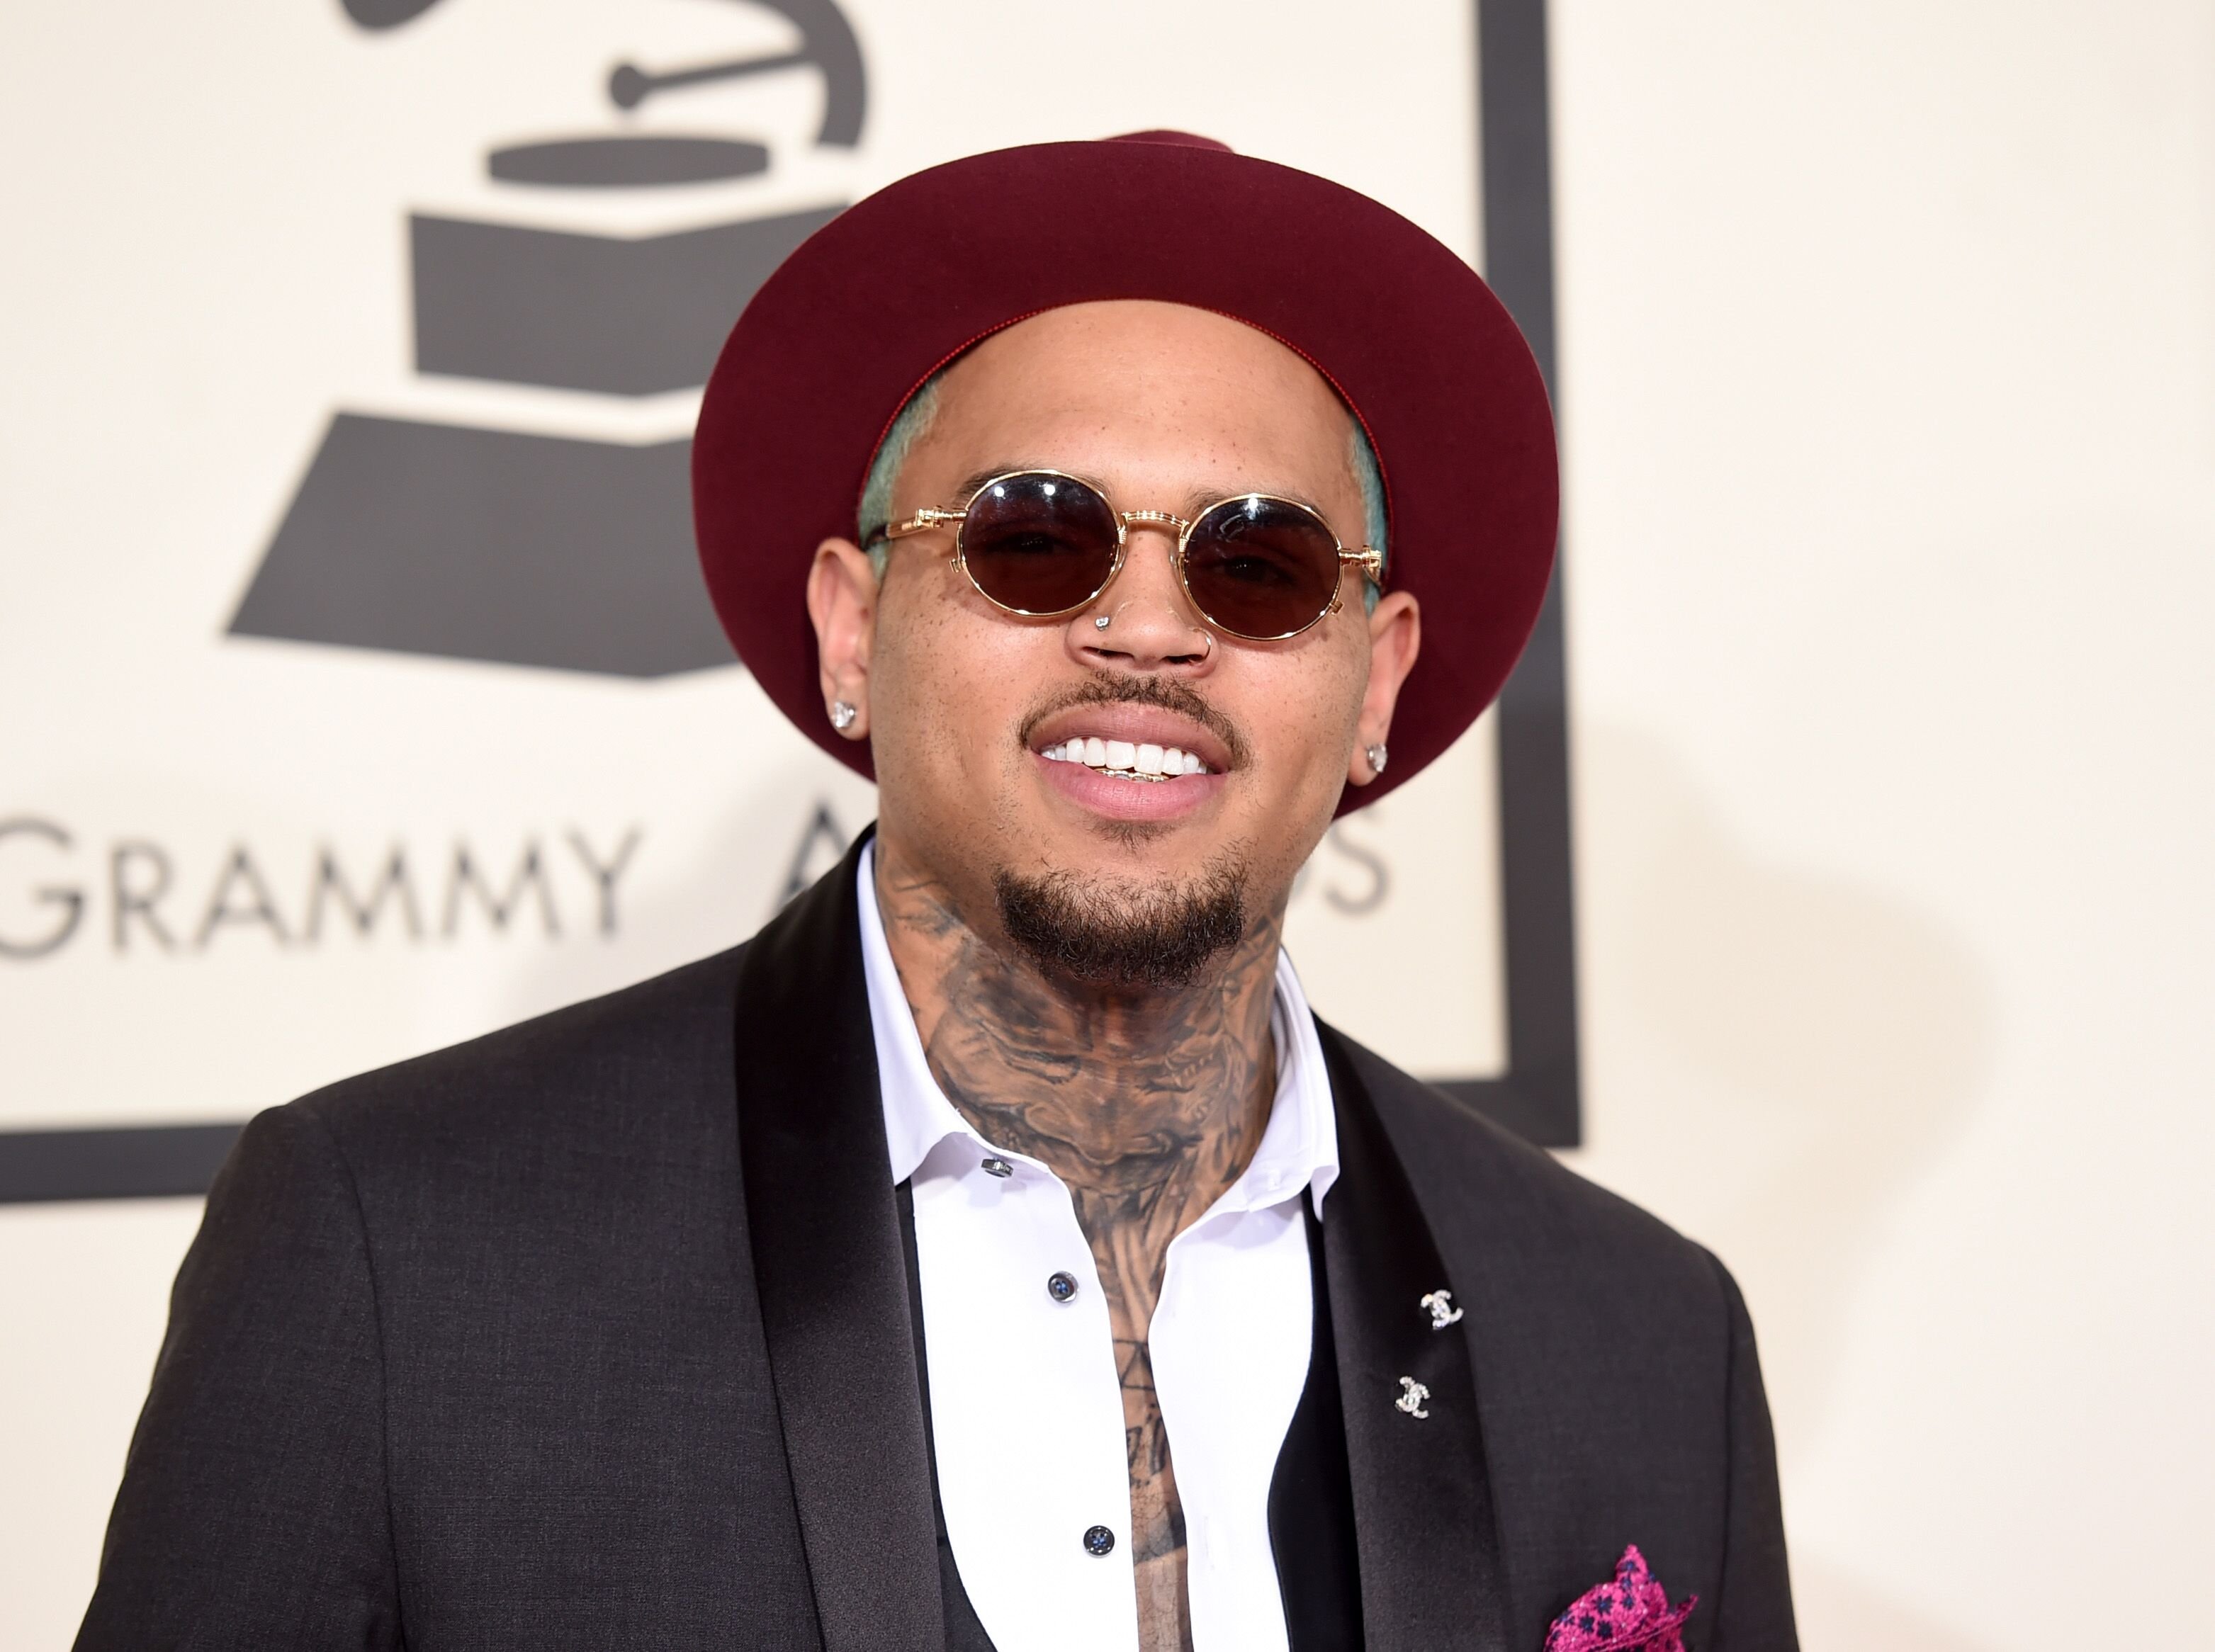 Chris Brown attends The 57th Annual GRAMMY Awards on February 8, 2015 in Los Angeles, California. | Photo: Getty Images